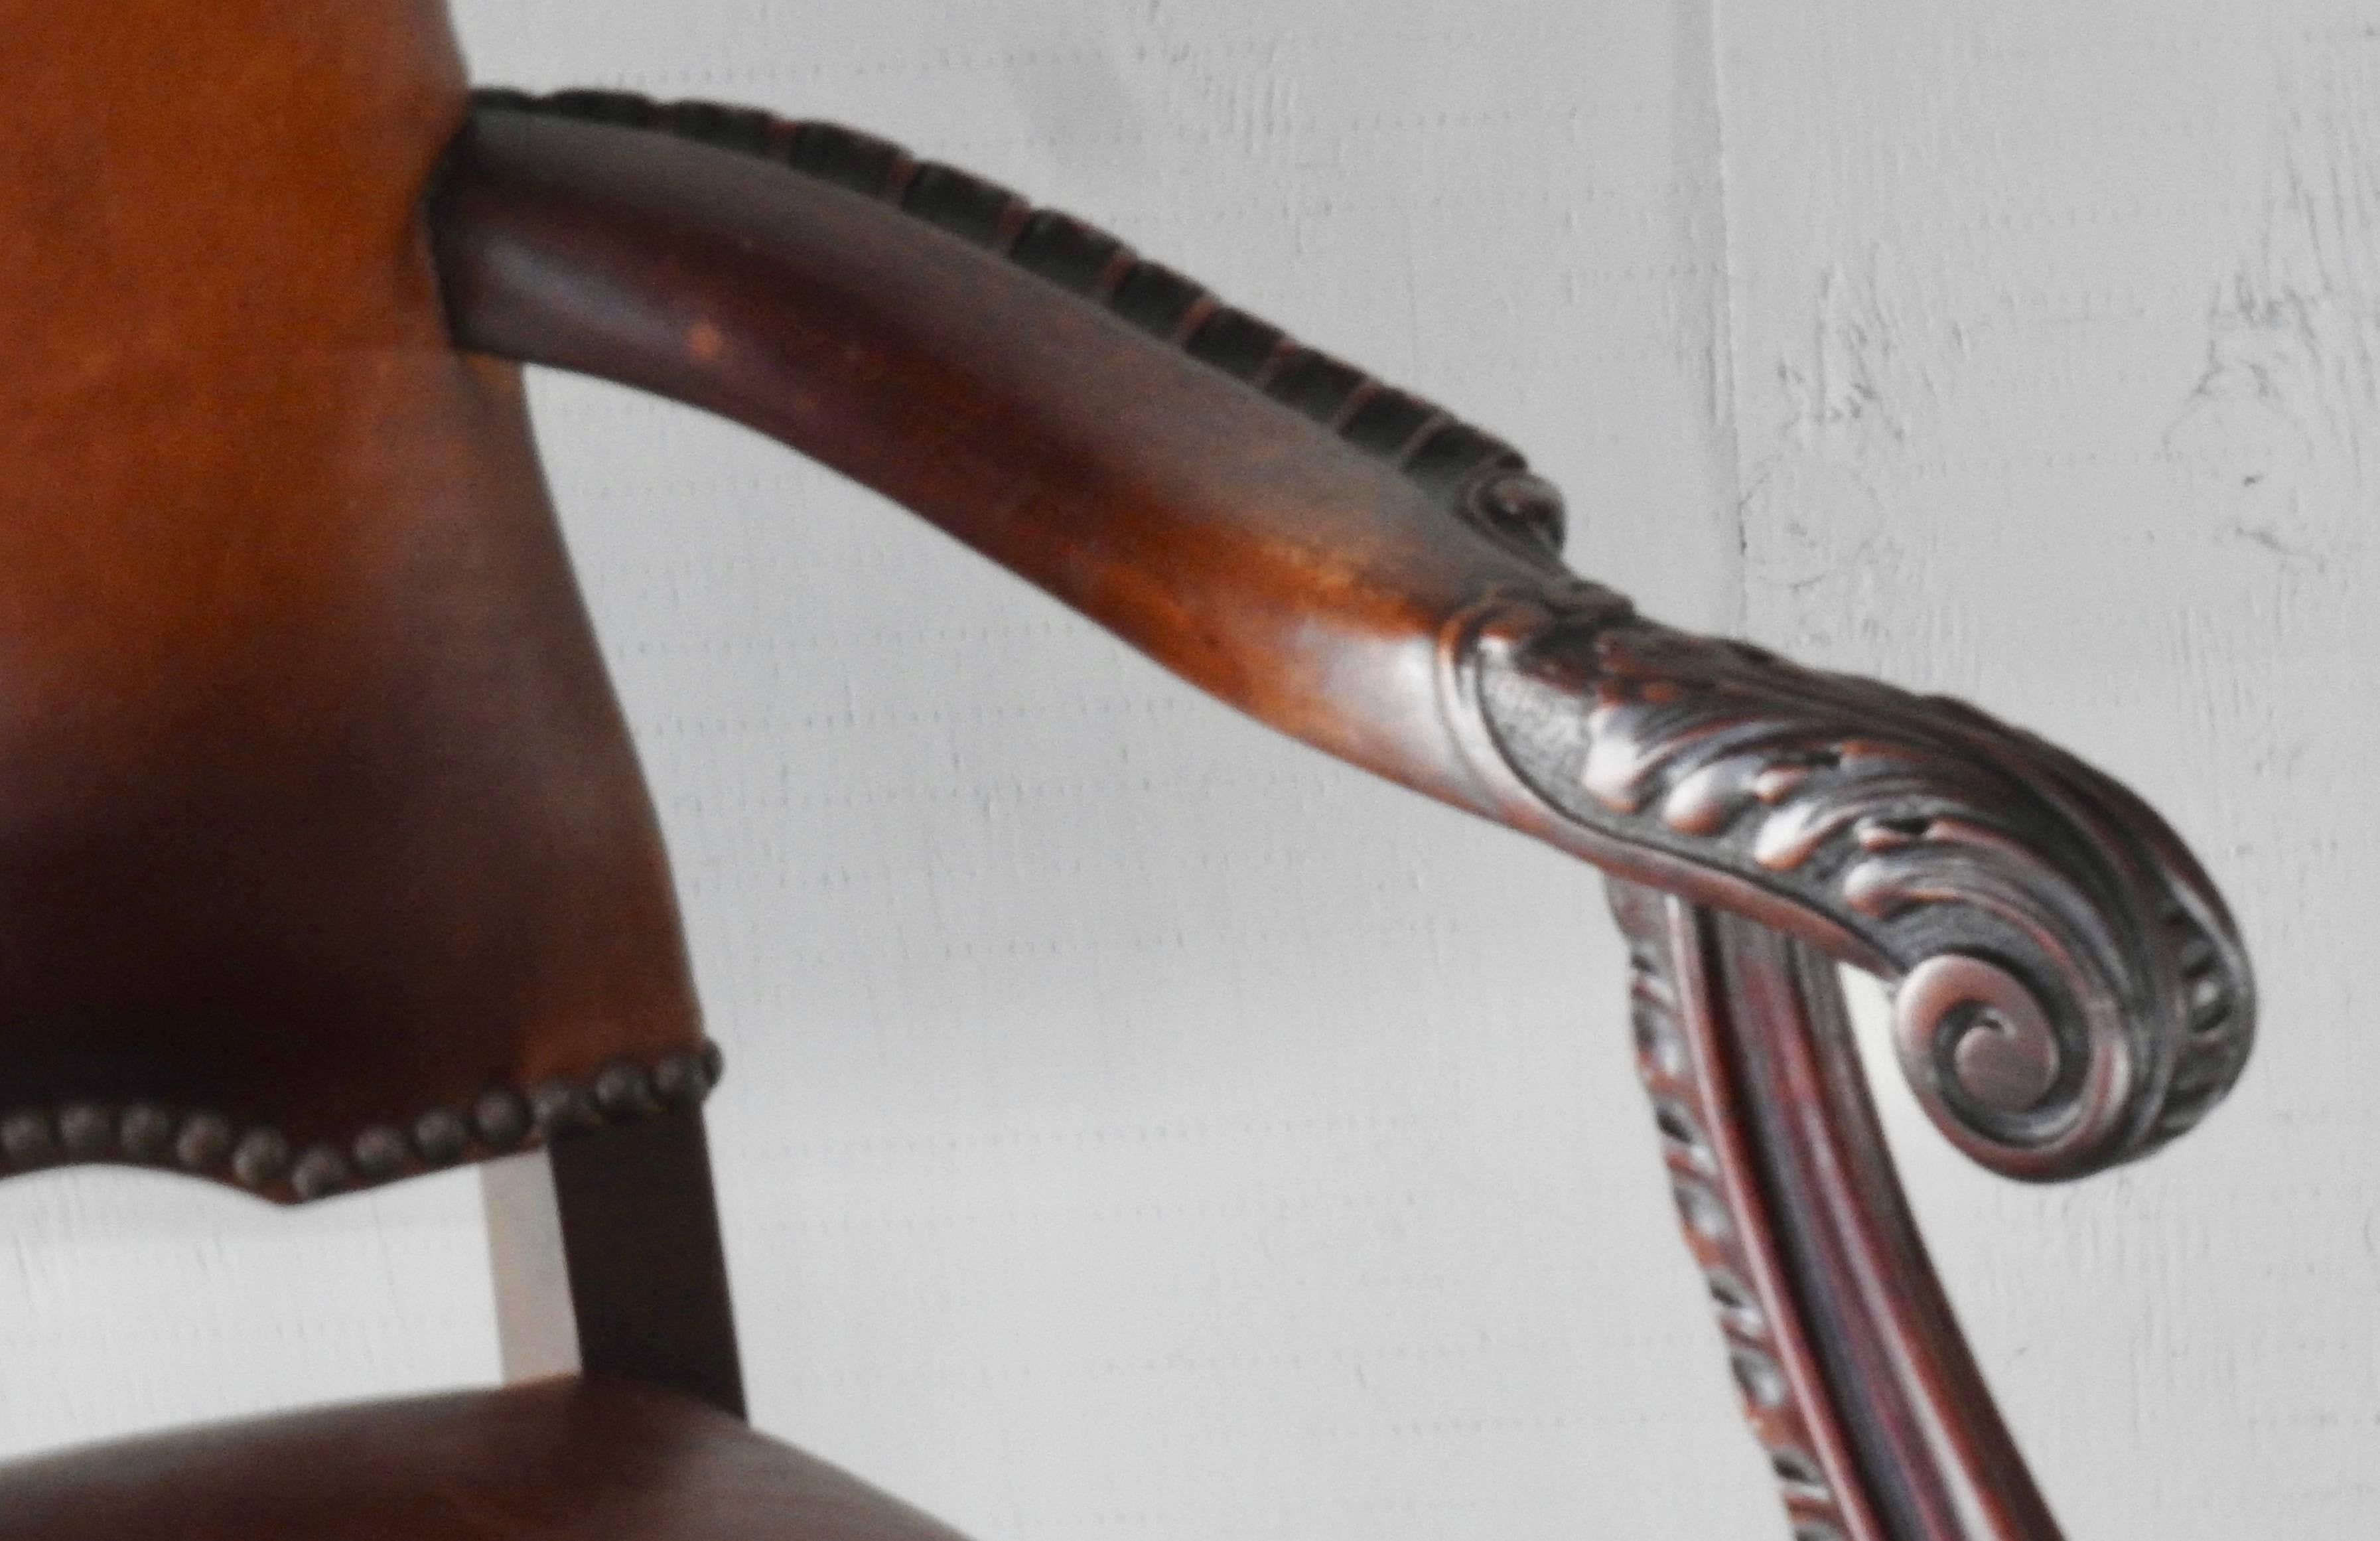 Carved walnut with leather make up this pair of 19th century American side chairs. Bronze tacks accent the edges. Hairy paw feet adorn the bottoms of the front legs and extend up to richly carved, curved legs. The arms form a graceful curve. The